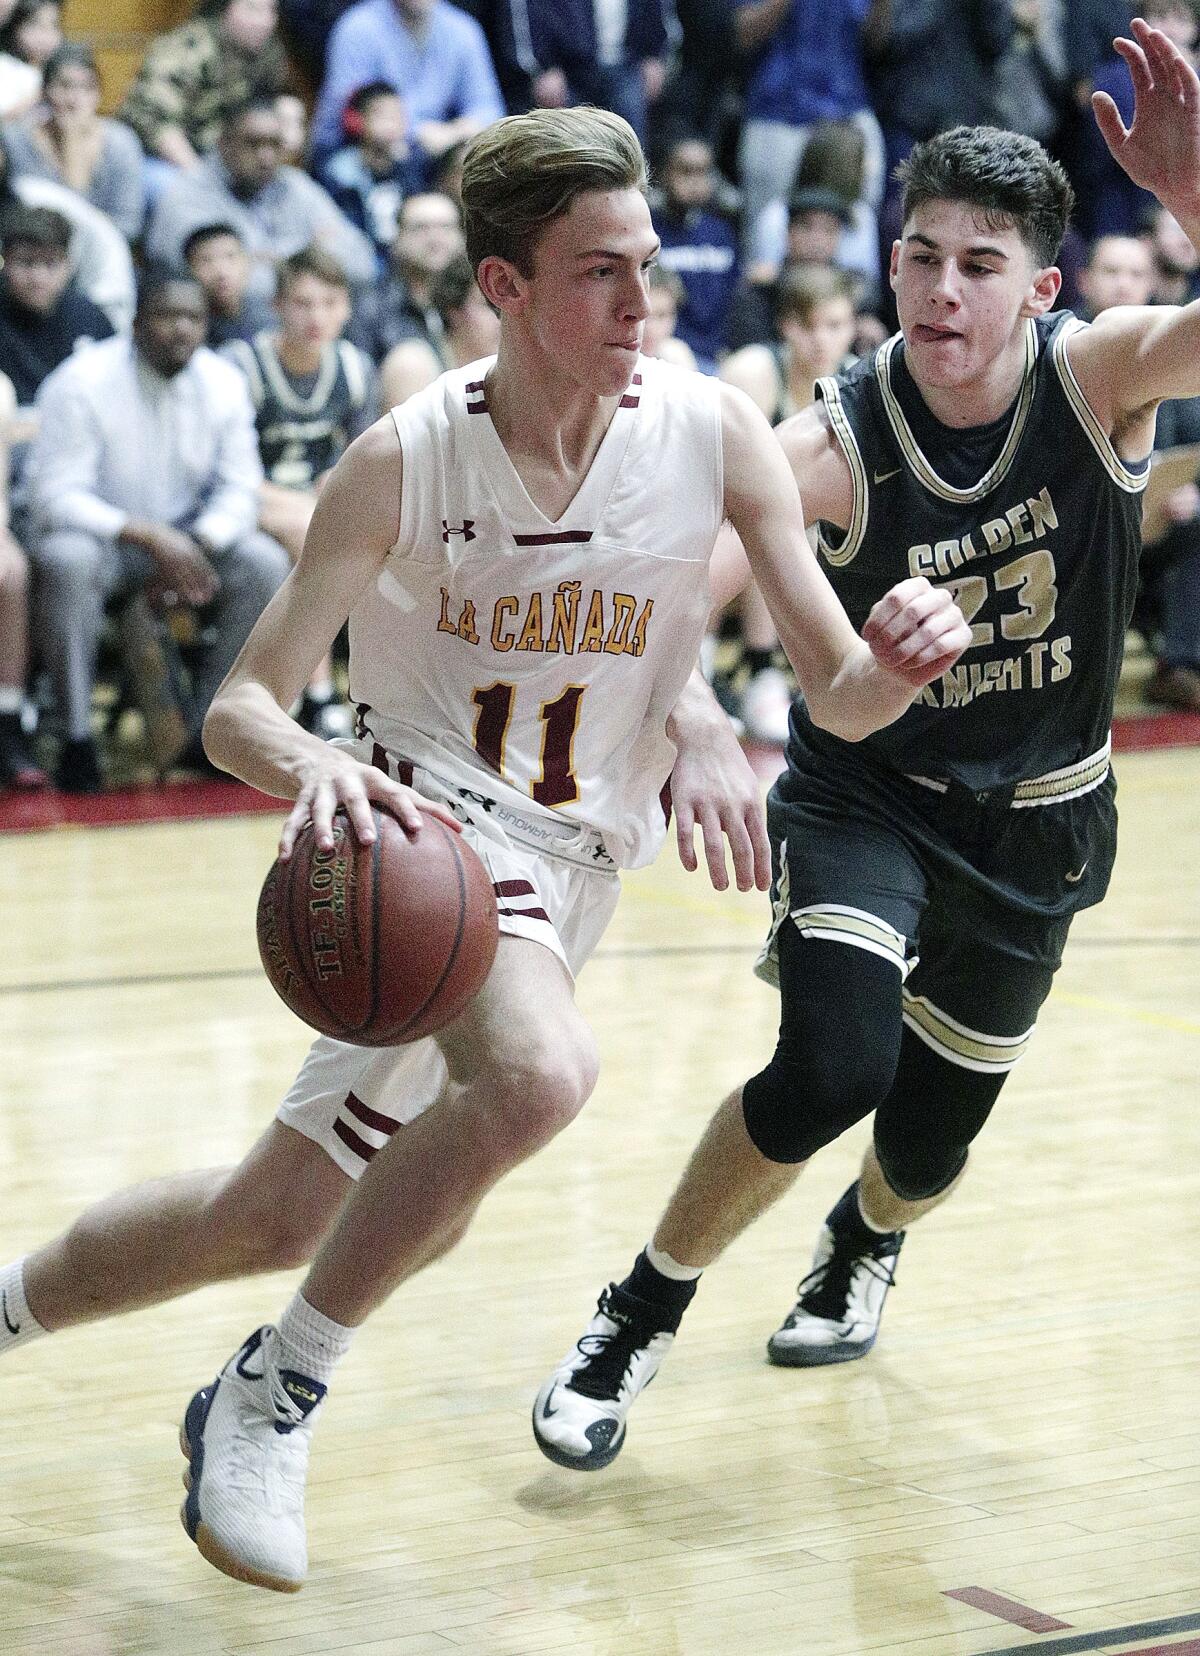 La Canada's Jacob Nussbaum drives against St. Francis' Jason Gallant in CIF Southern Section Division II-A first-round boys' basketball playoff at La Canada High School on Wednesday, February 12, 2020.